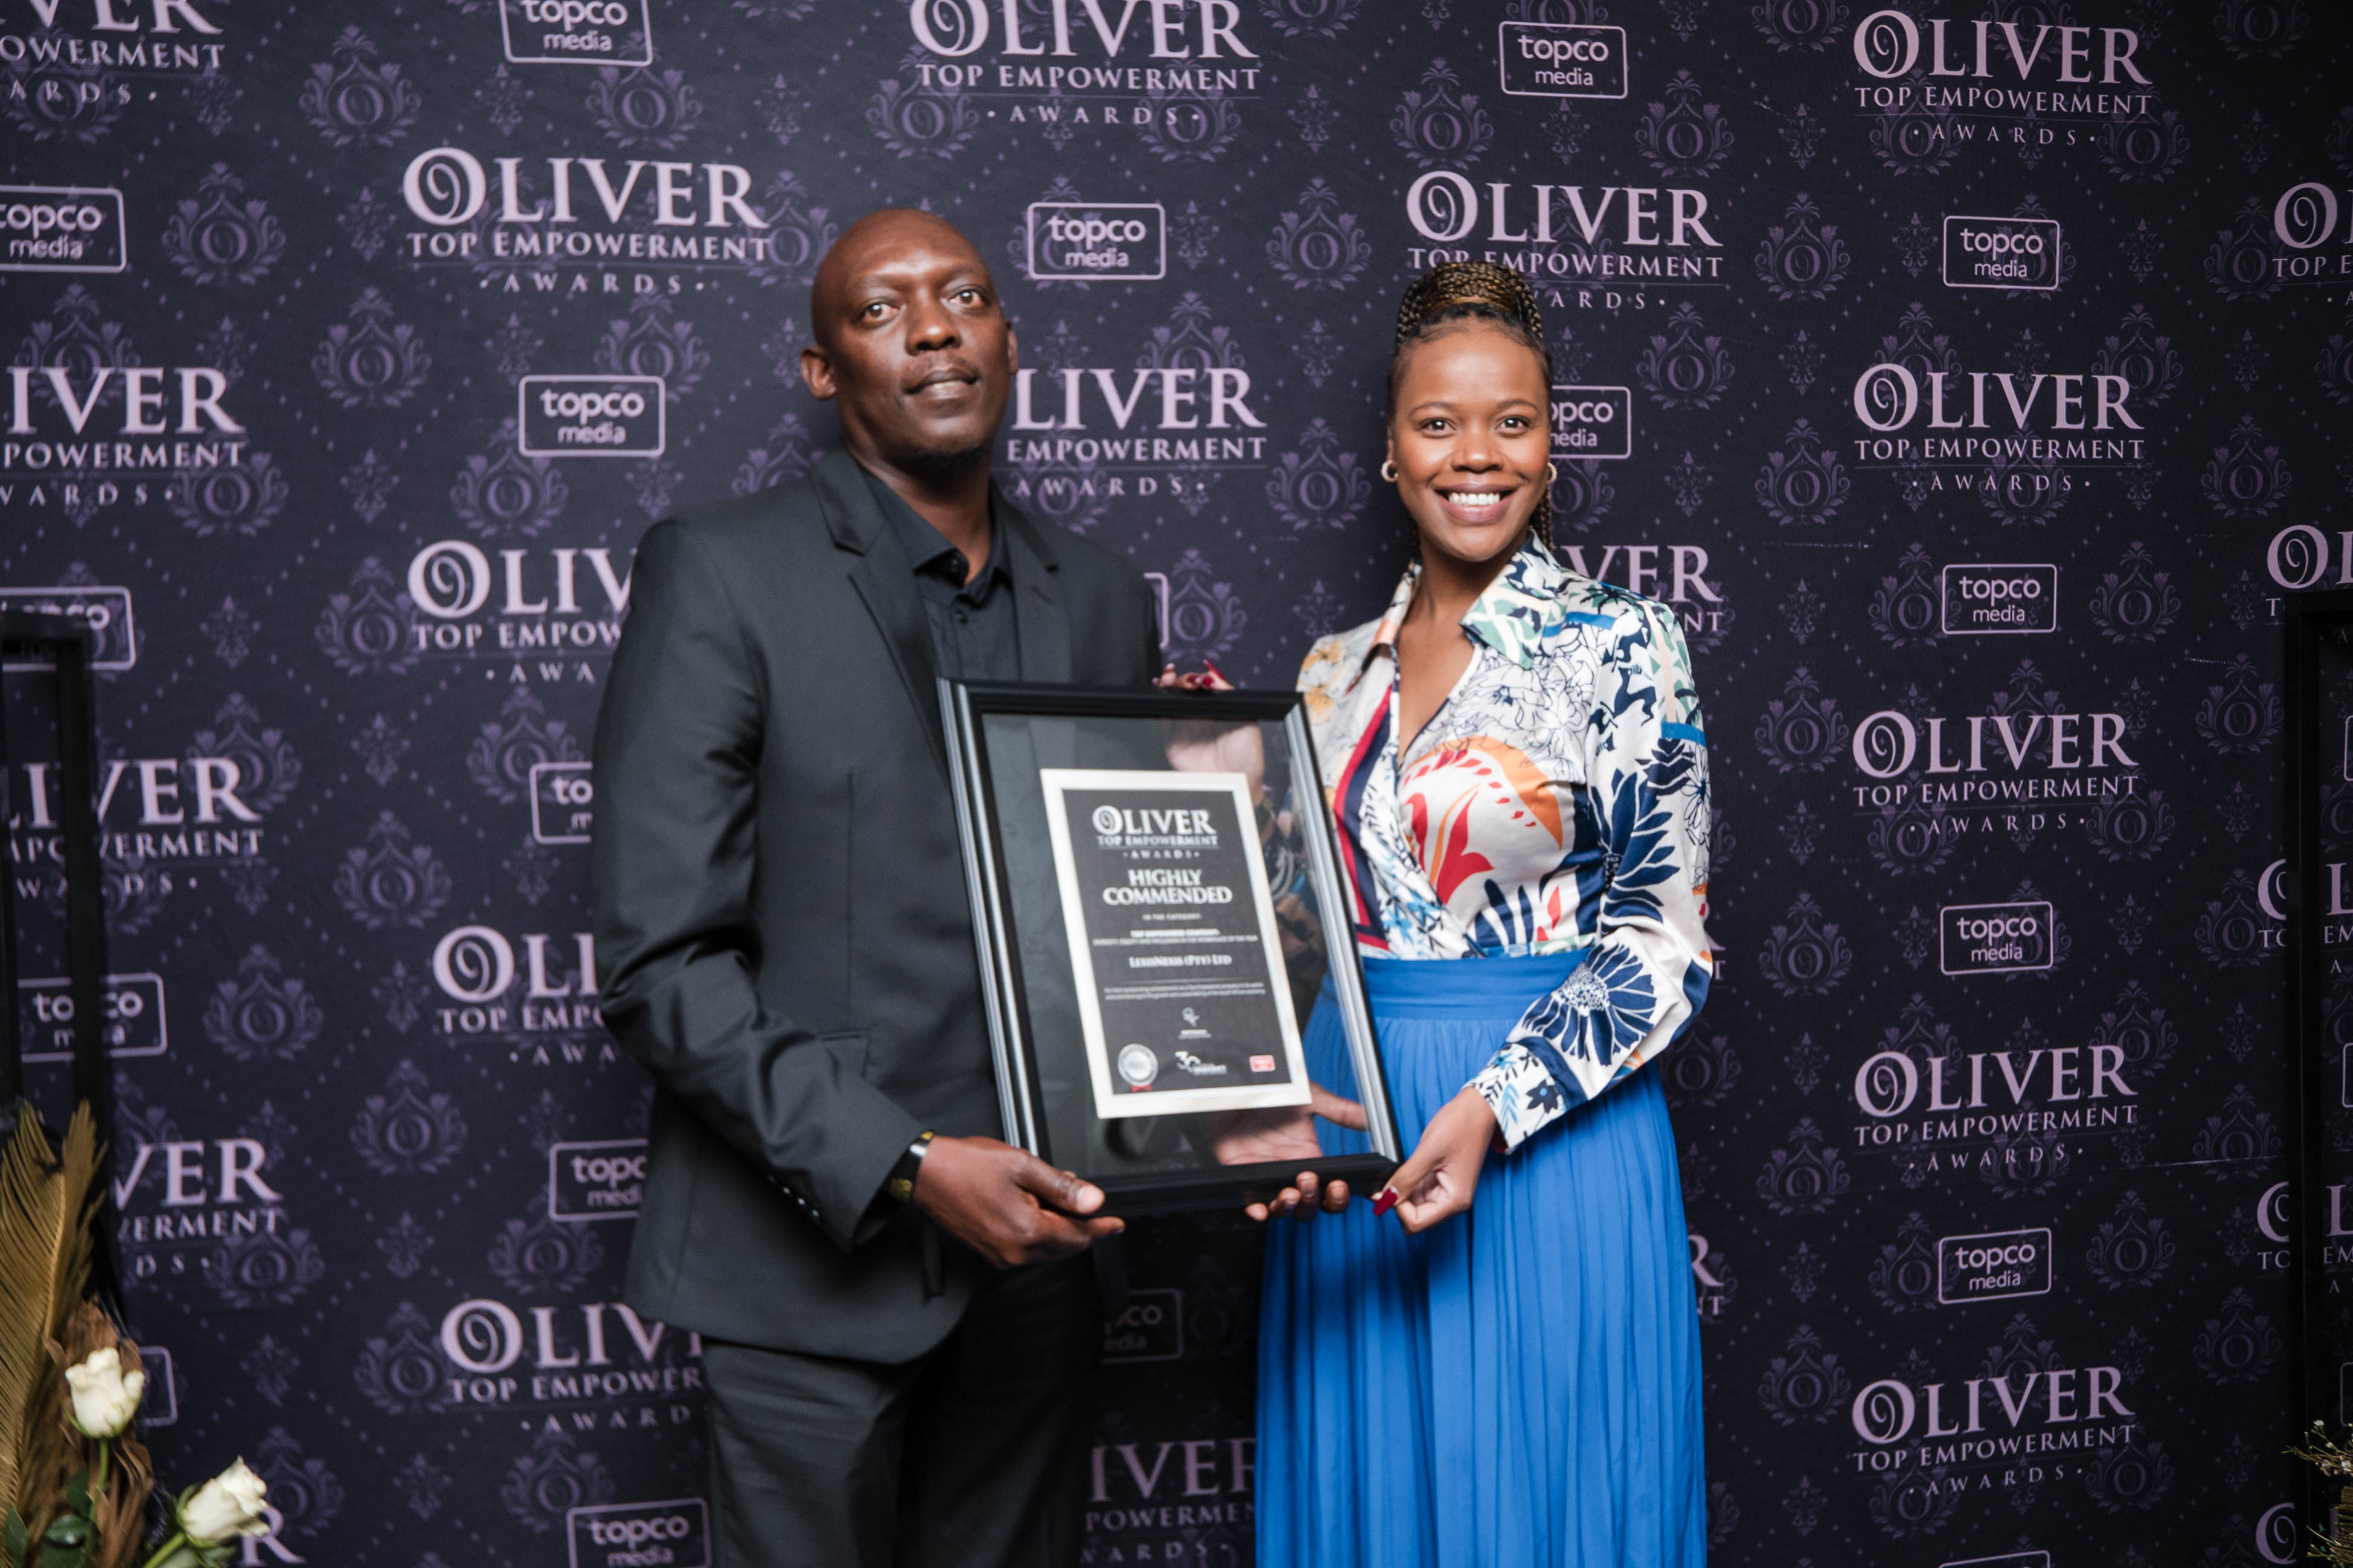 LexisNexis South Africa Shines at Oliver Top Empowerment Awards for Pioneering Digital Transformation